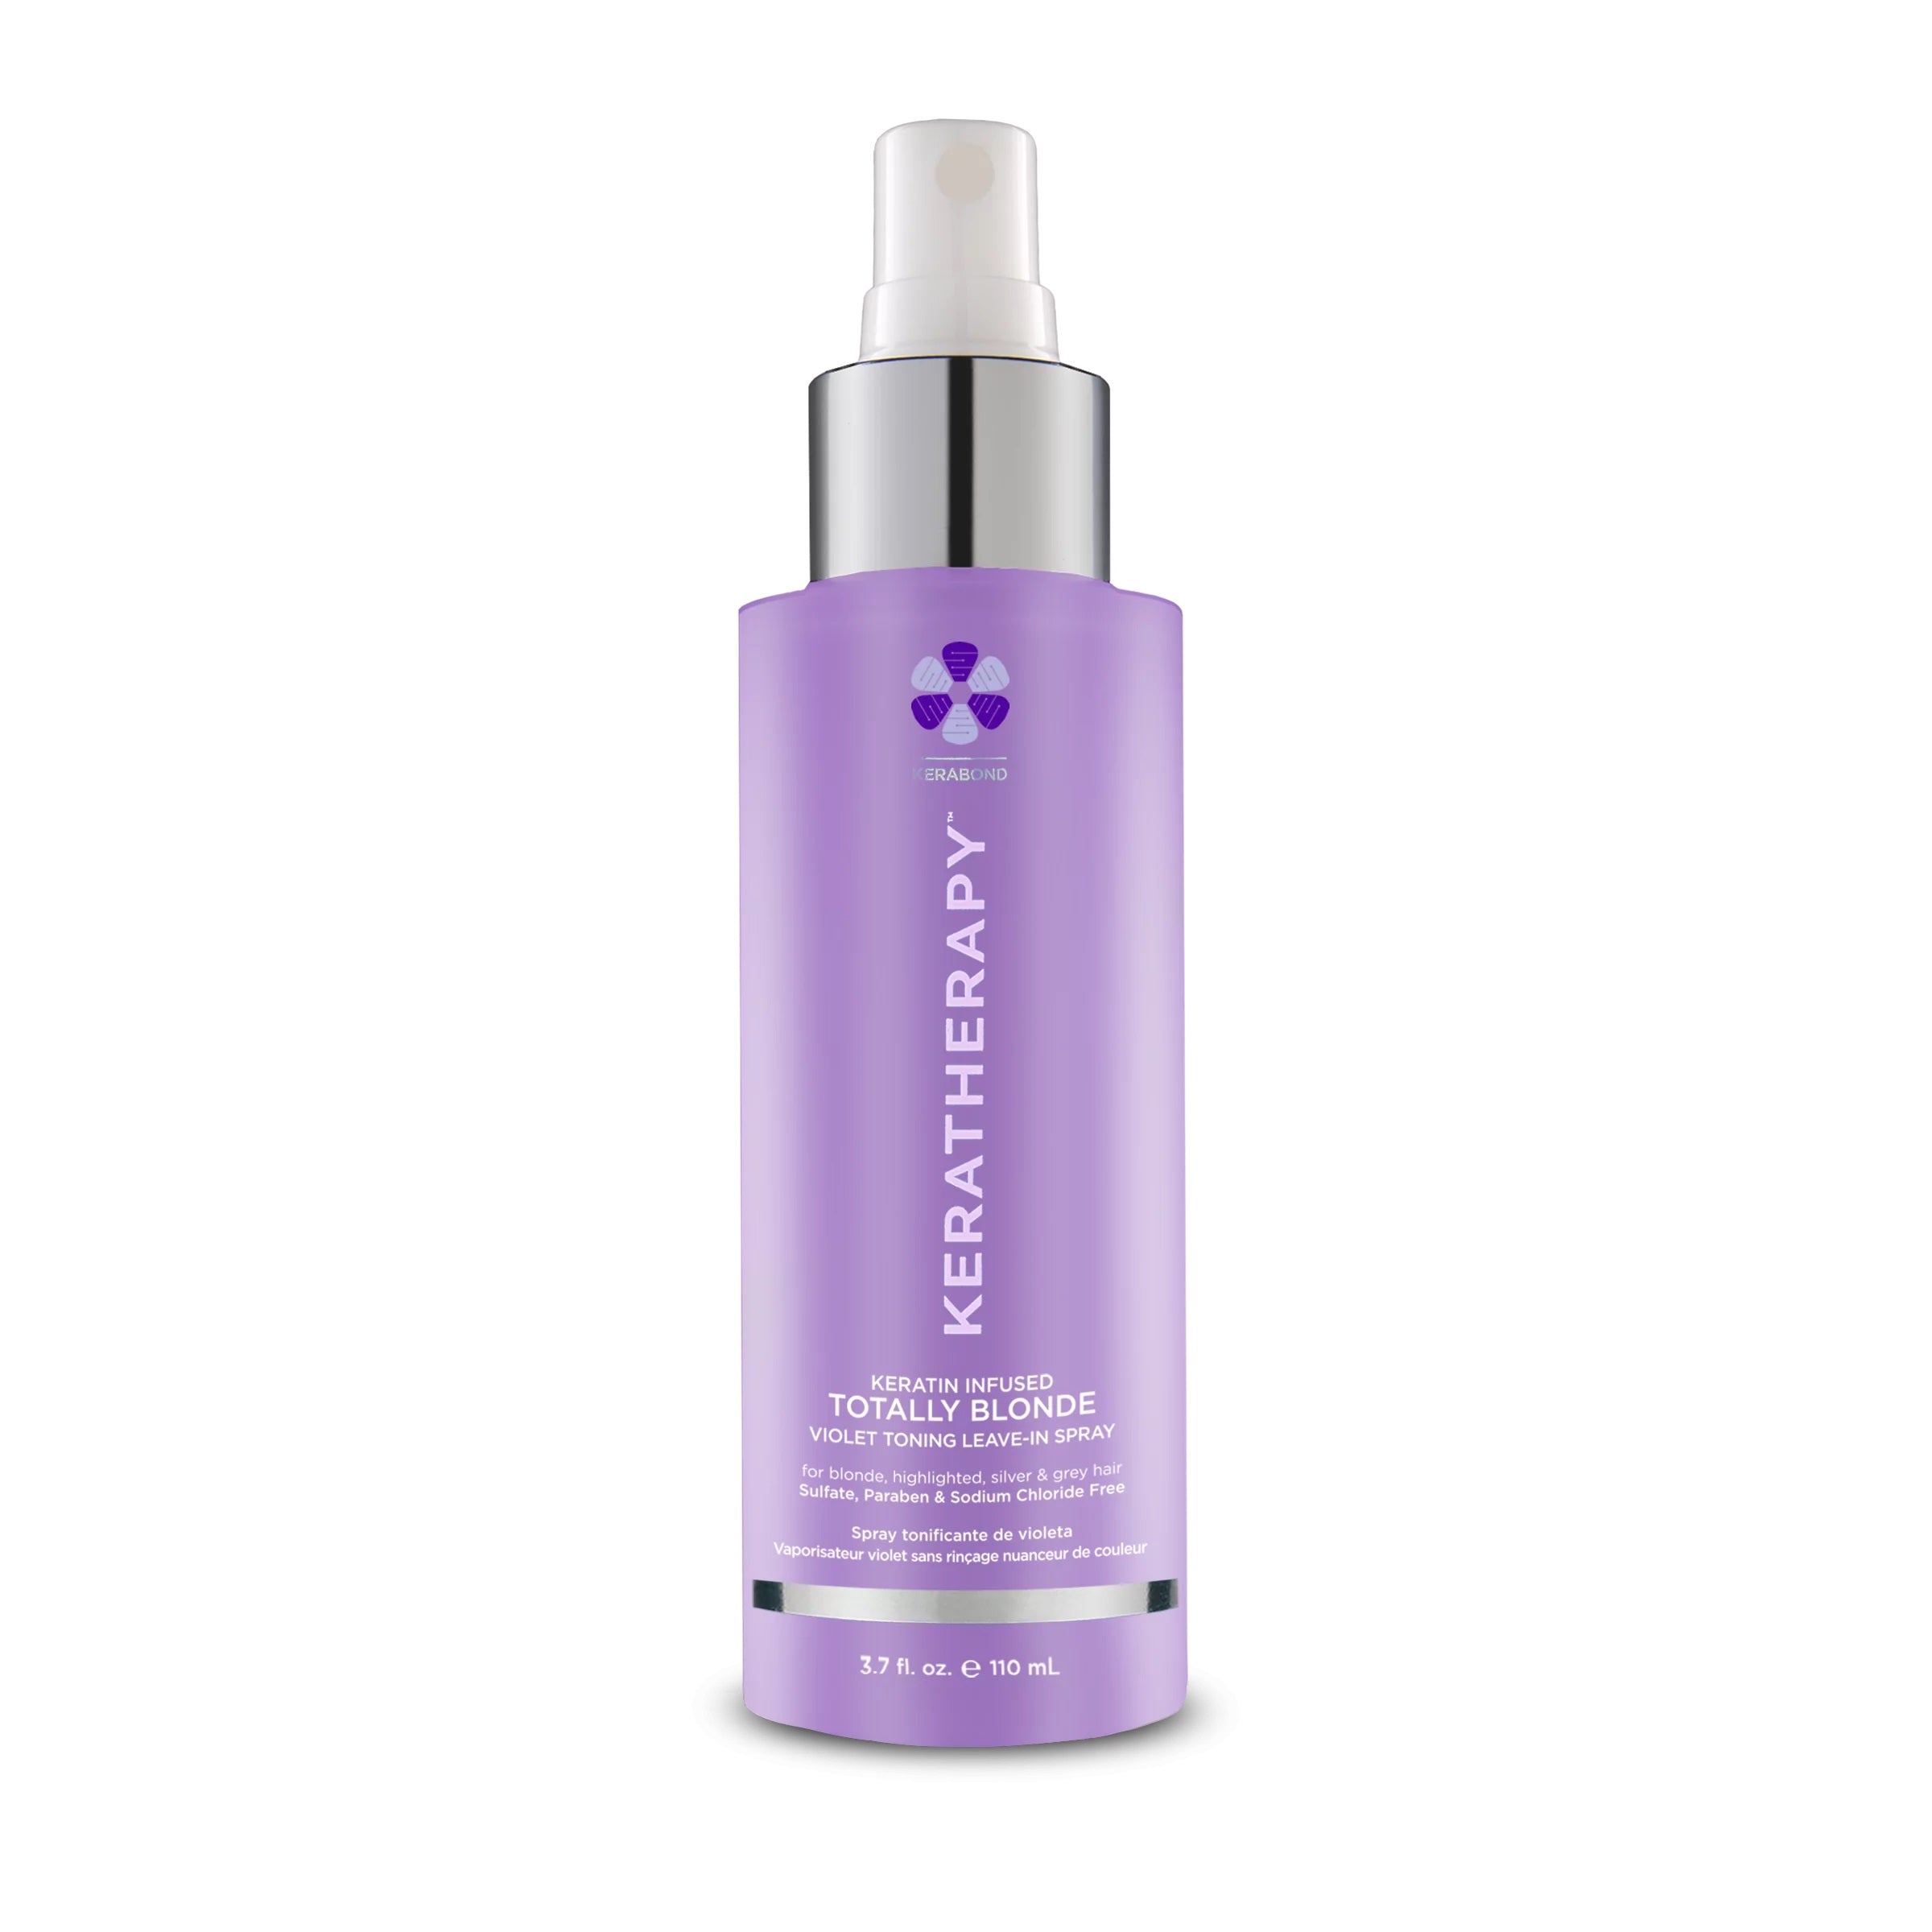 Totally Blonde Violet Toning Leave-in Conditioner Spray 110ml